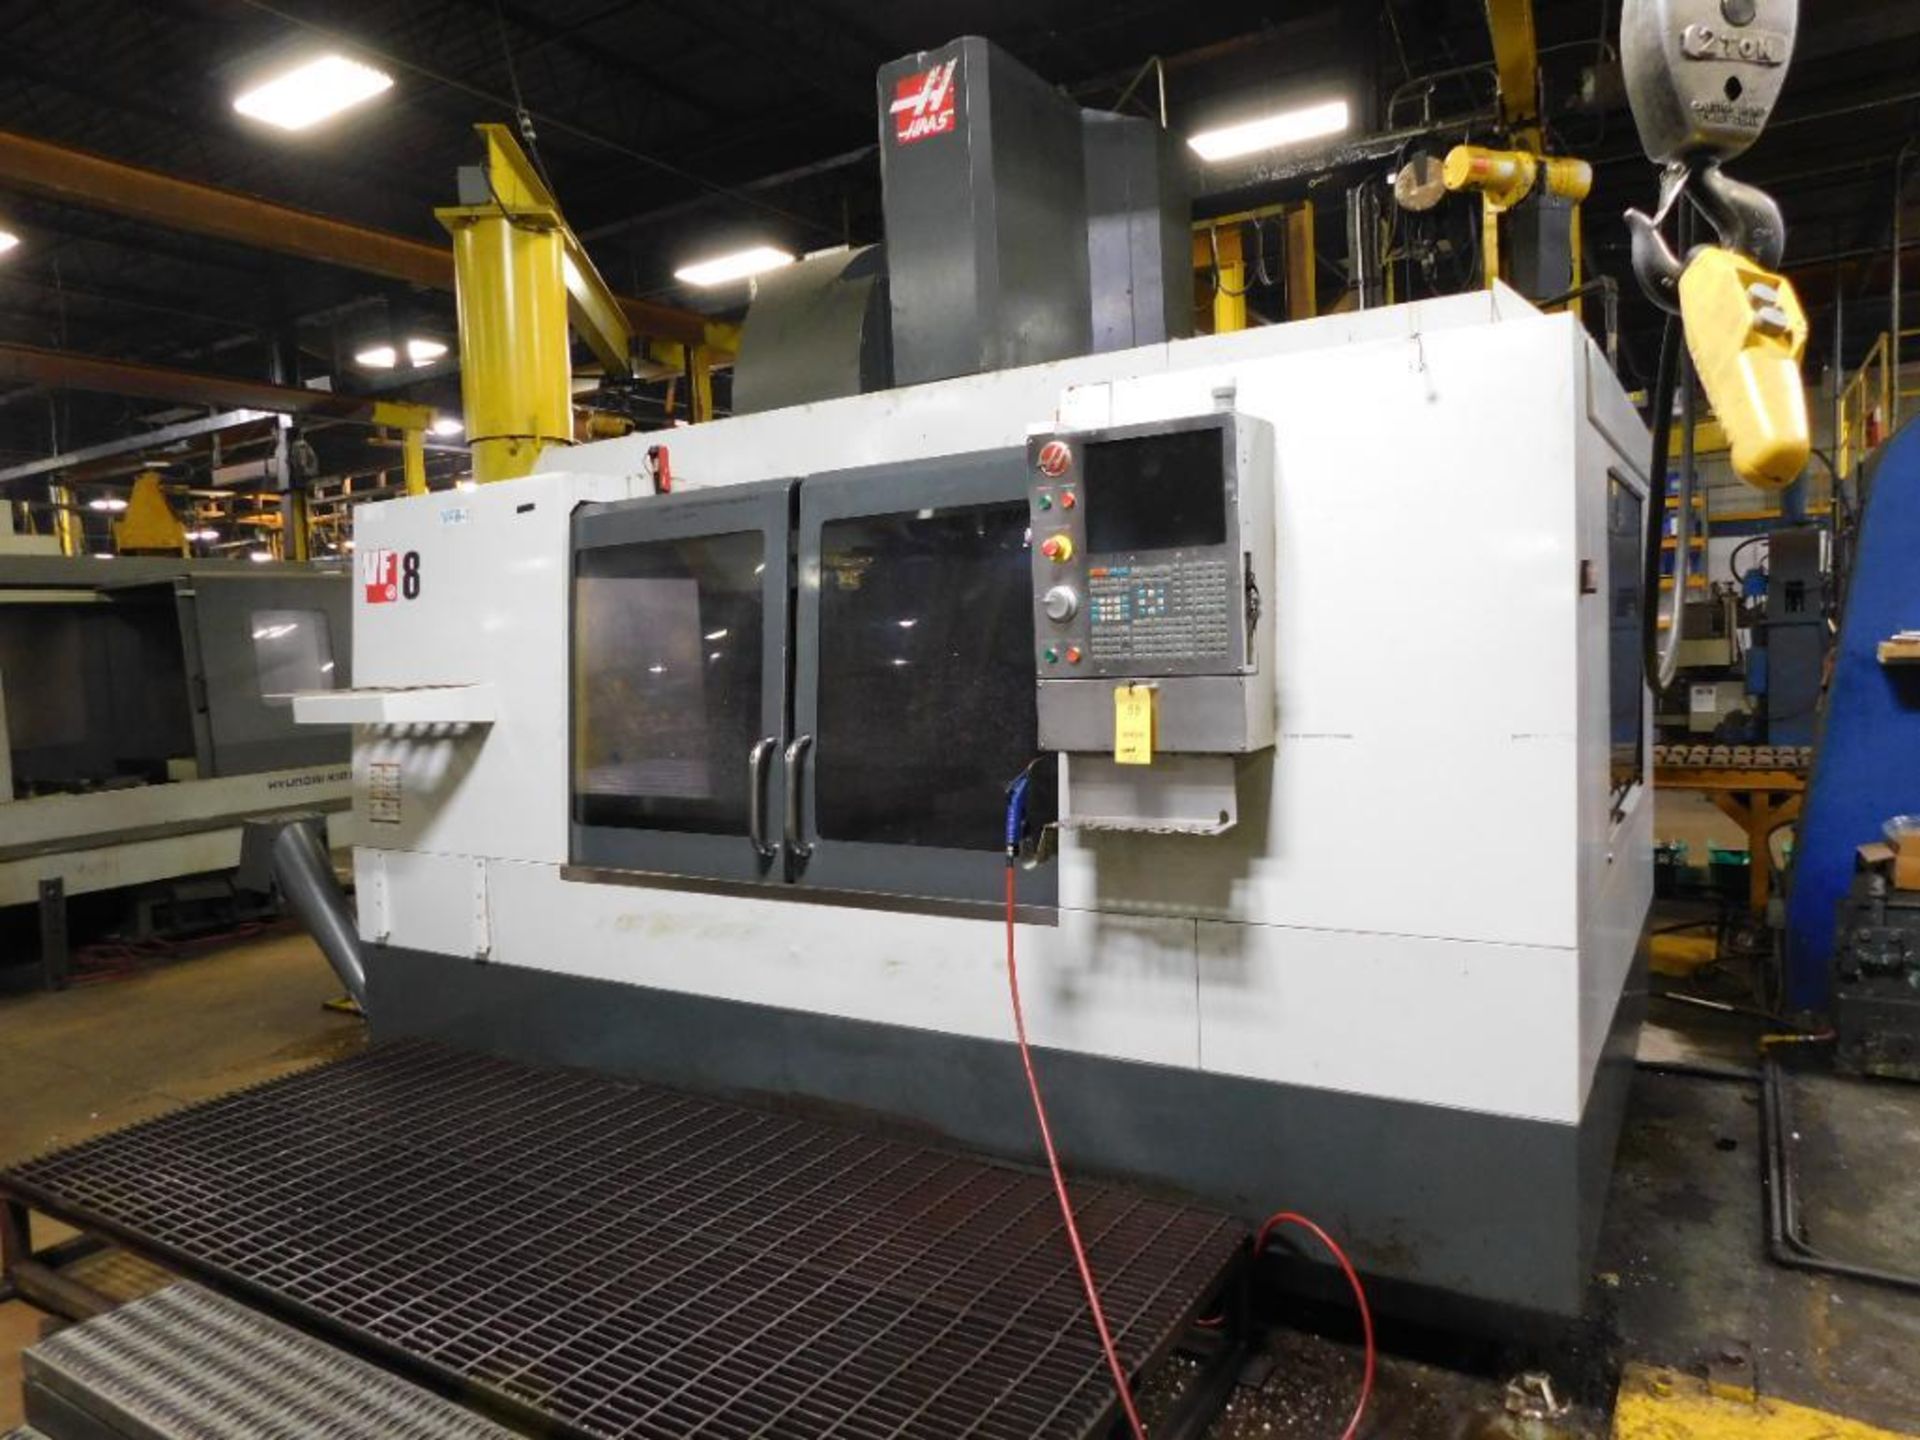 2014 Haas Model VF-8/50 3-Axis CNC Vertical Machining Center, S/N: 1111710 (Unit # 524), 30 HP CAT 5 - Image 3 of 11